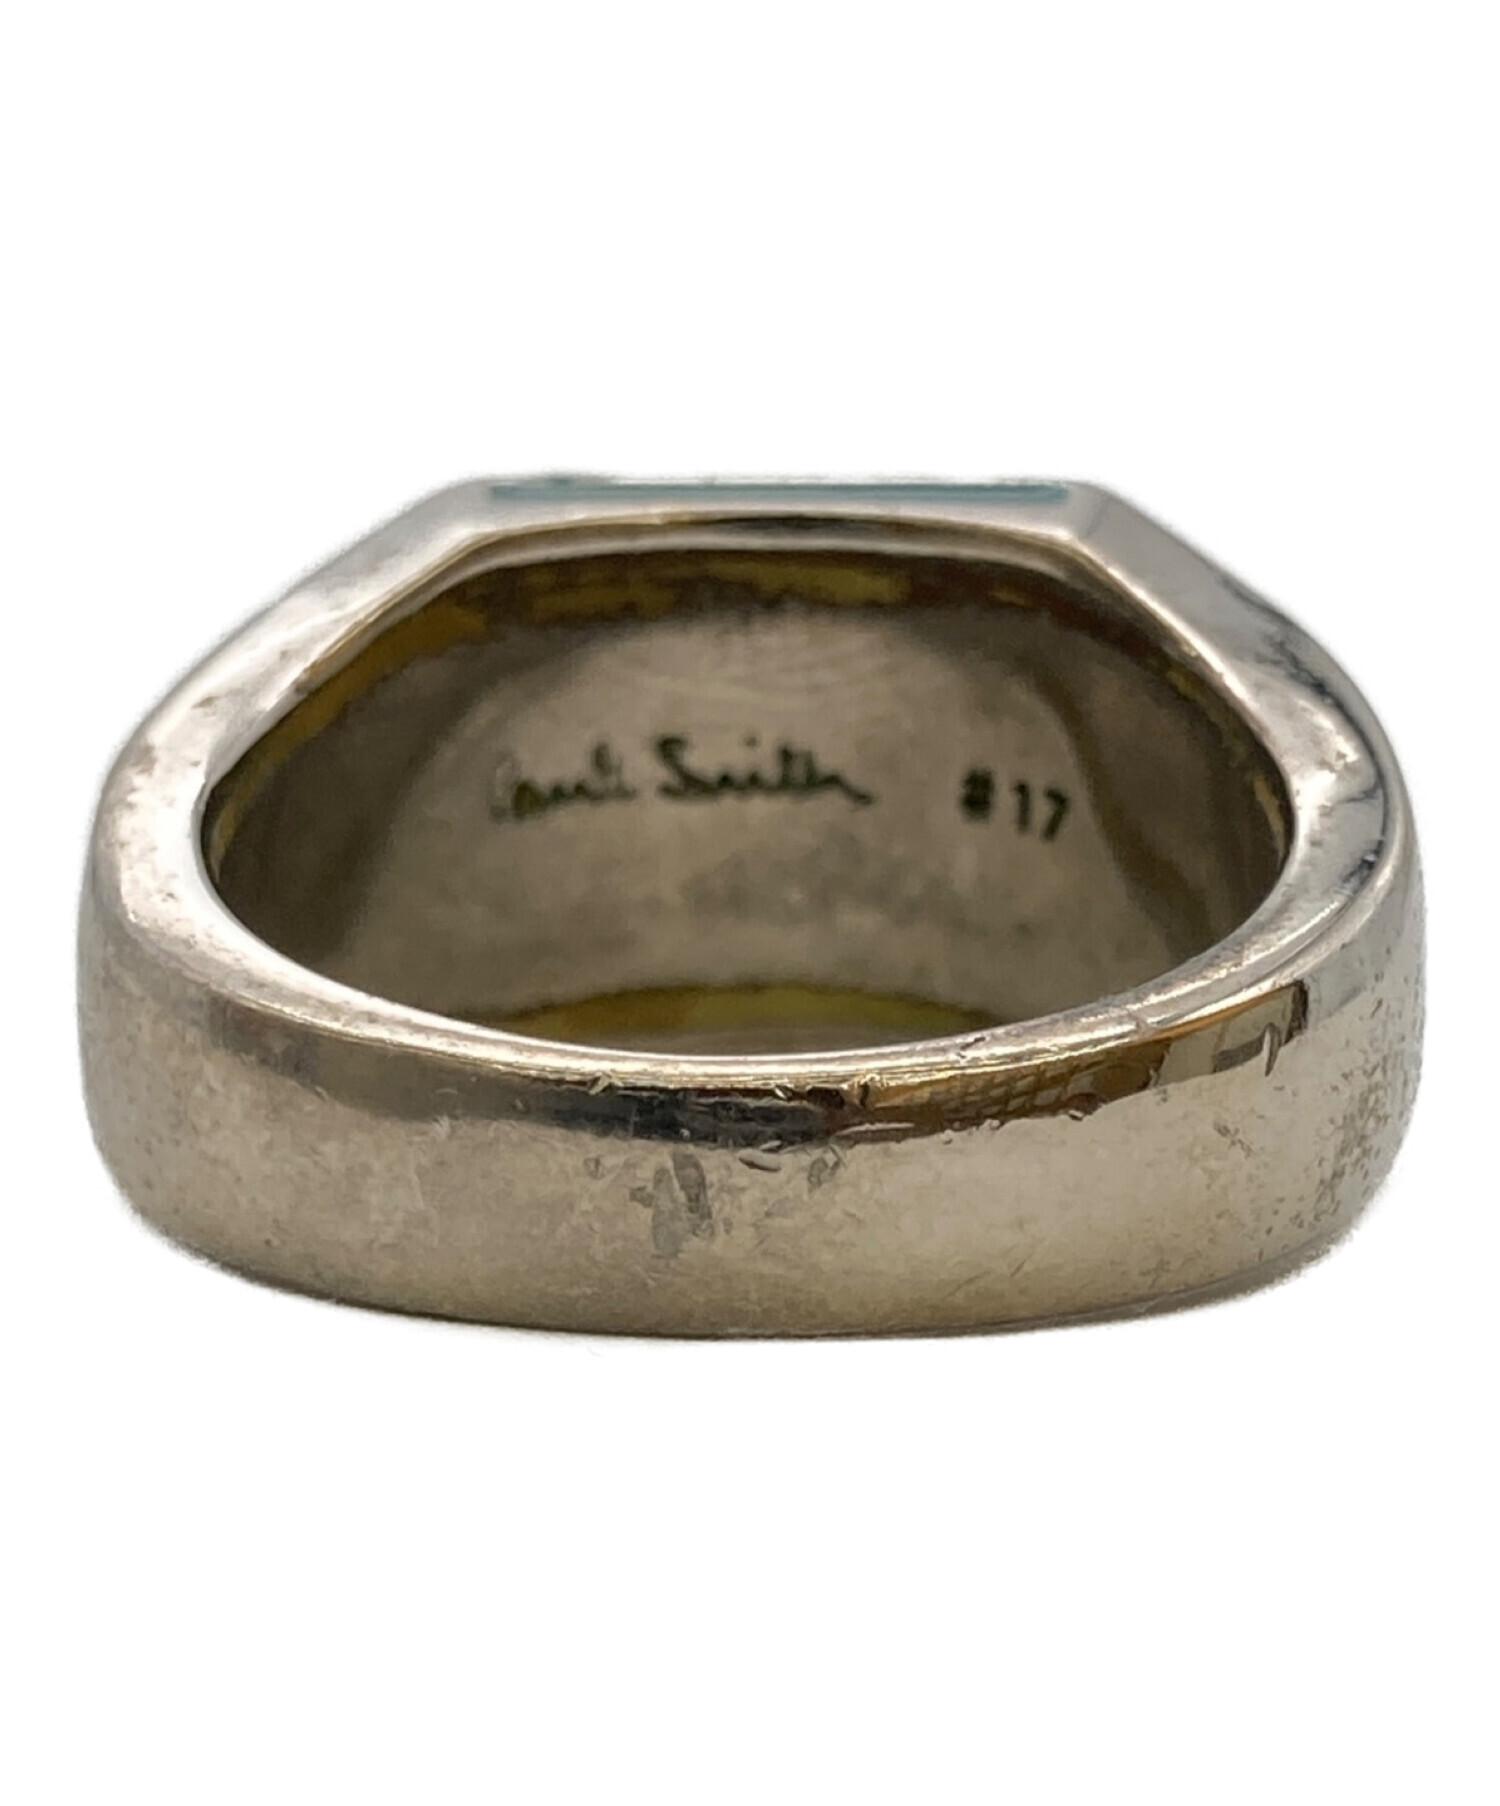 Paul Smith Hammered Silver Ring 17号